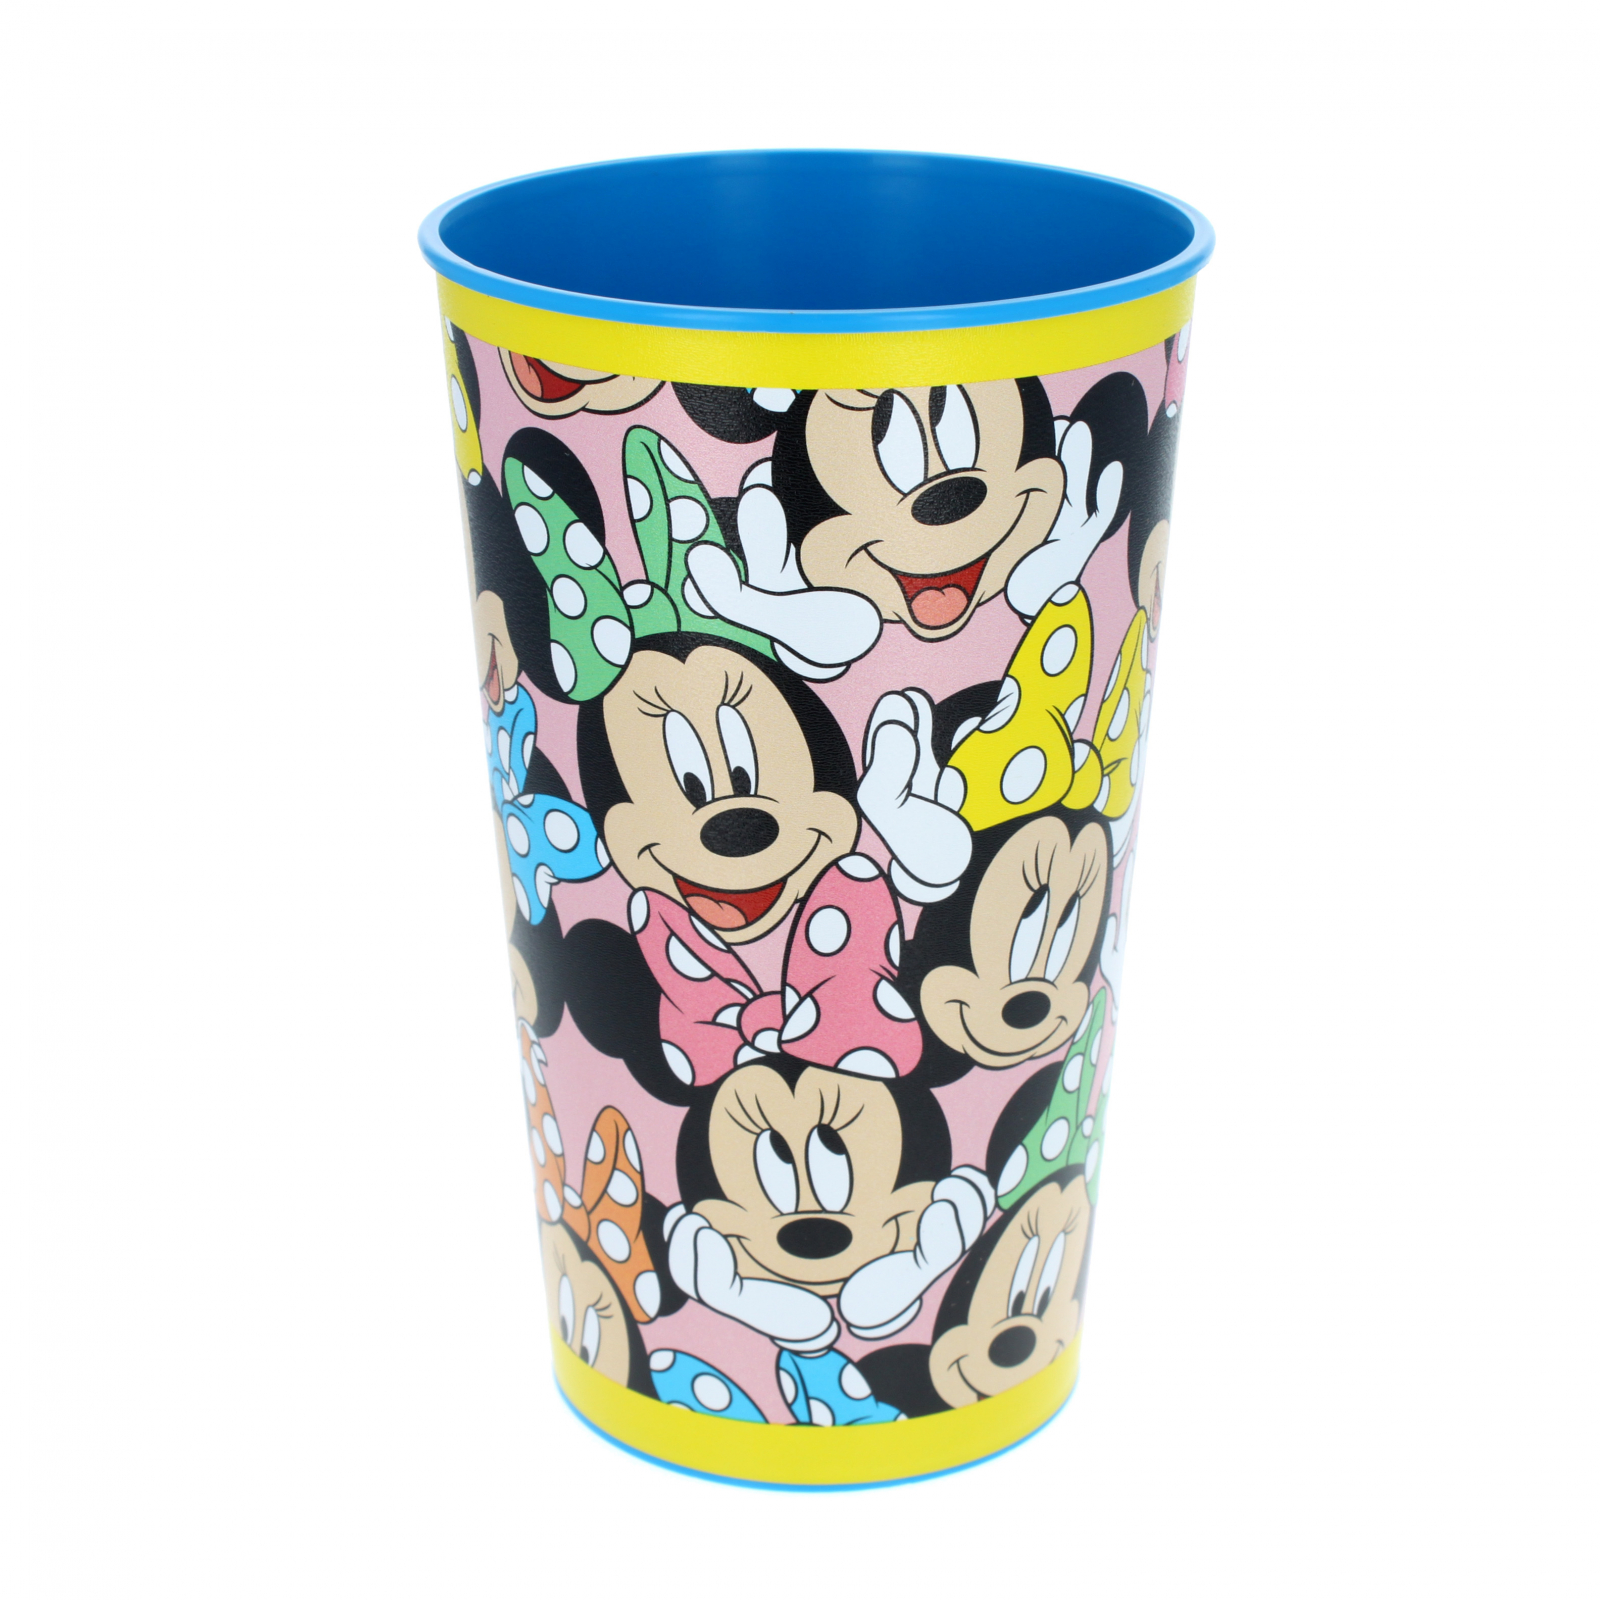 Unique Industries Disney Minnie Mouse Kids Plastic Drinking Cup Large 22 Ounce Food Safe Cup